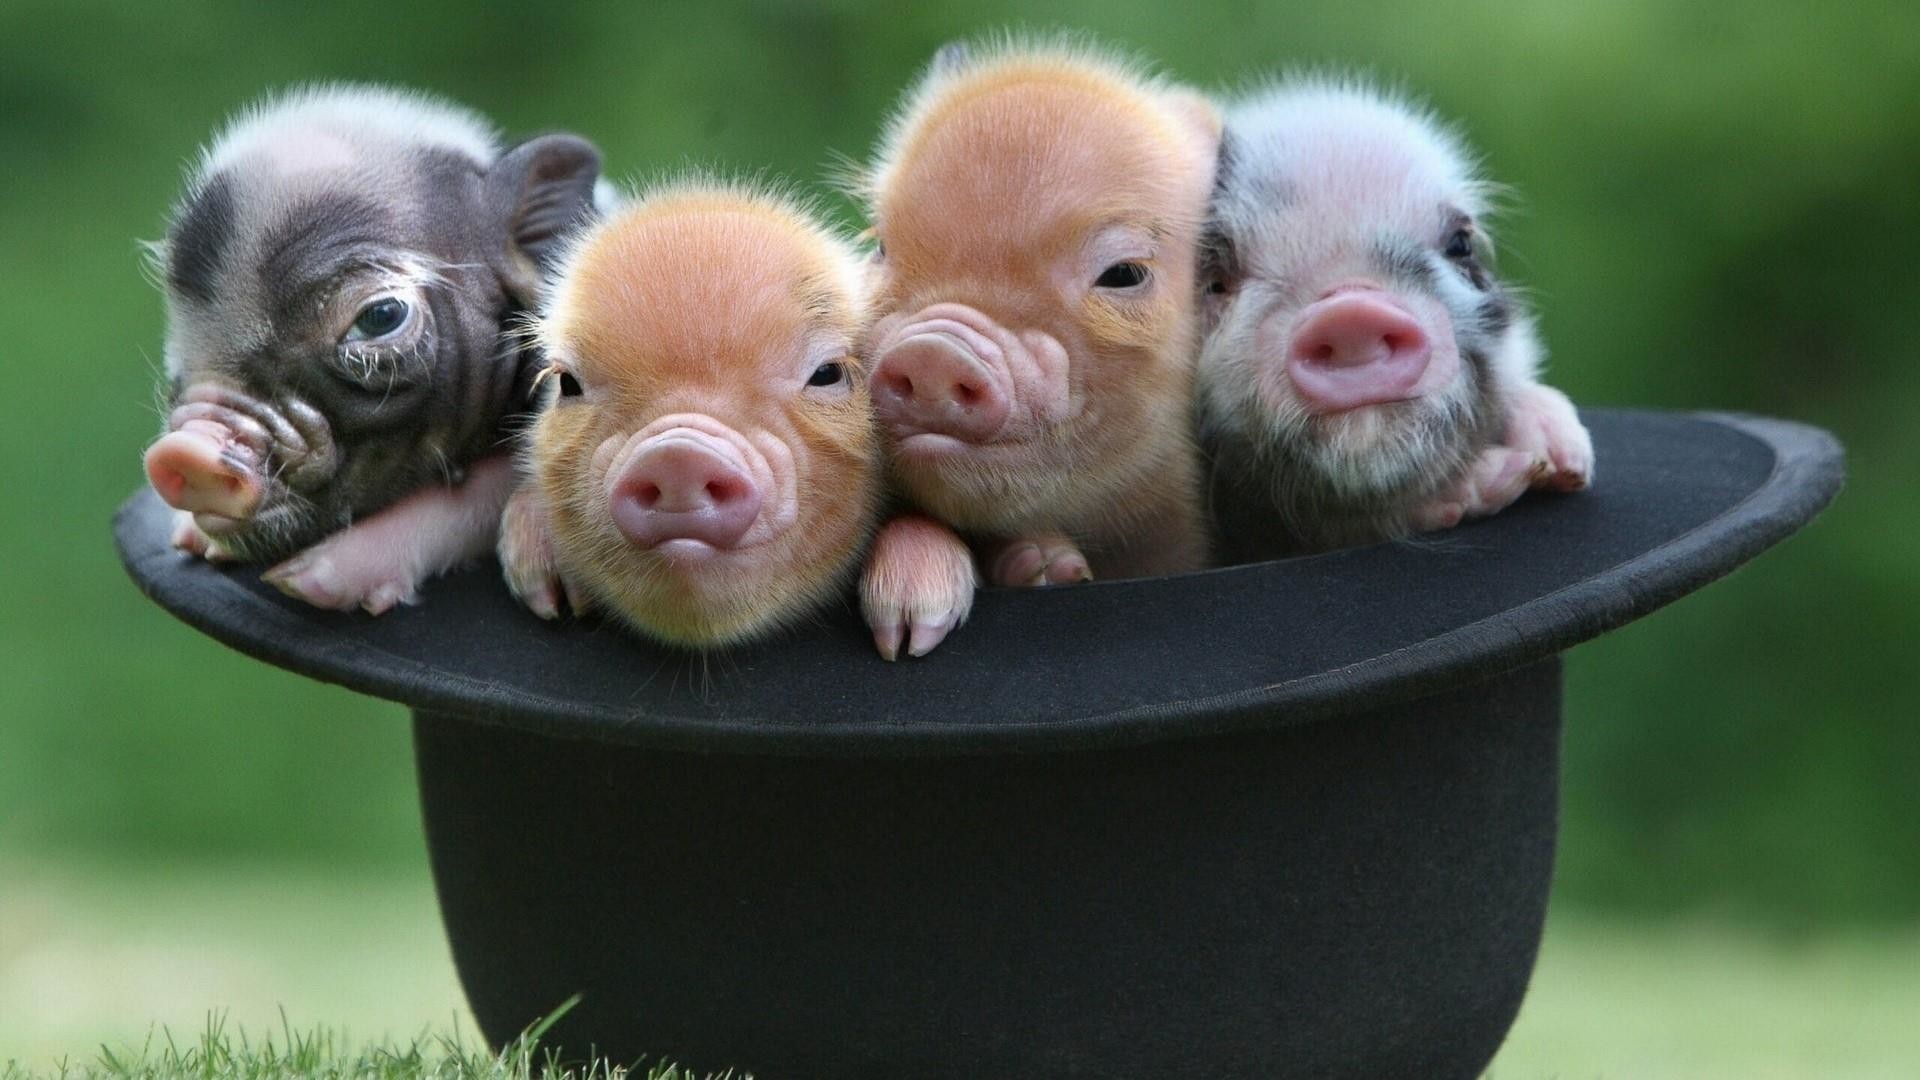 1920x1080 Baby pigs in the hat wallpaper